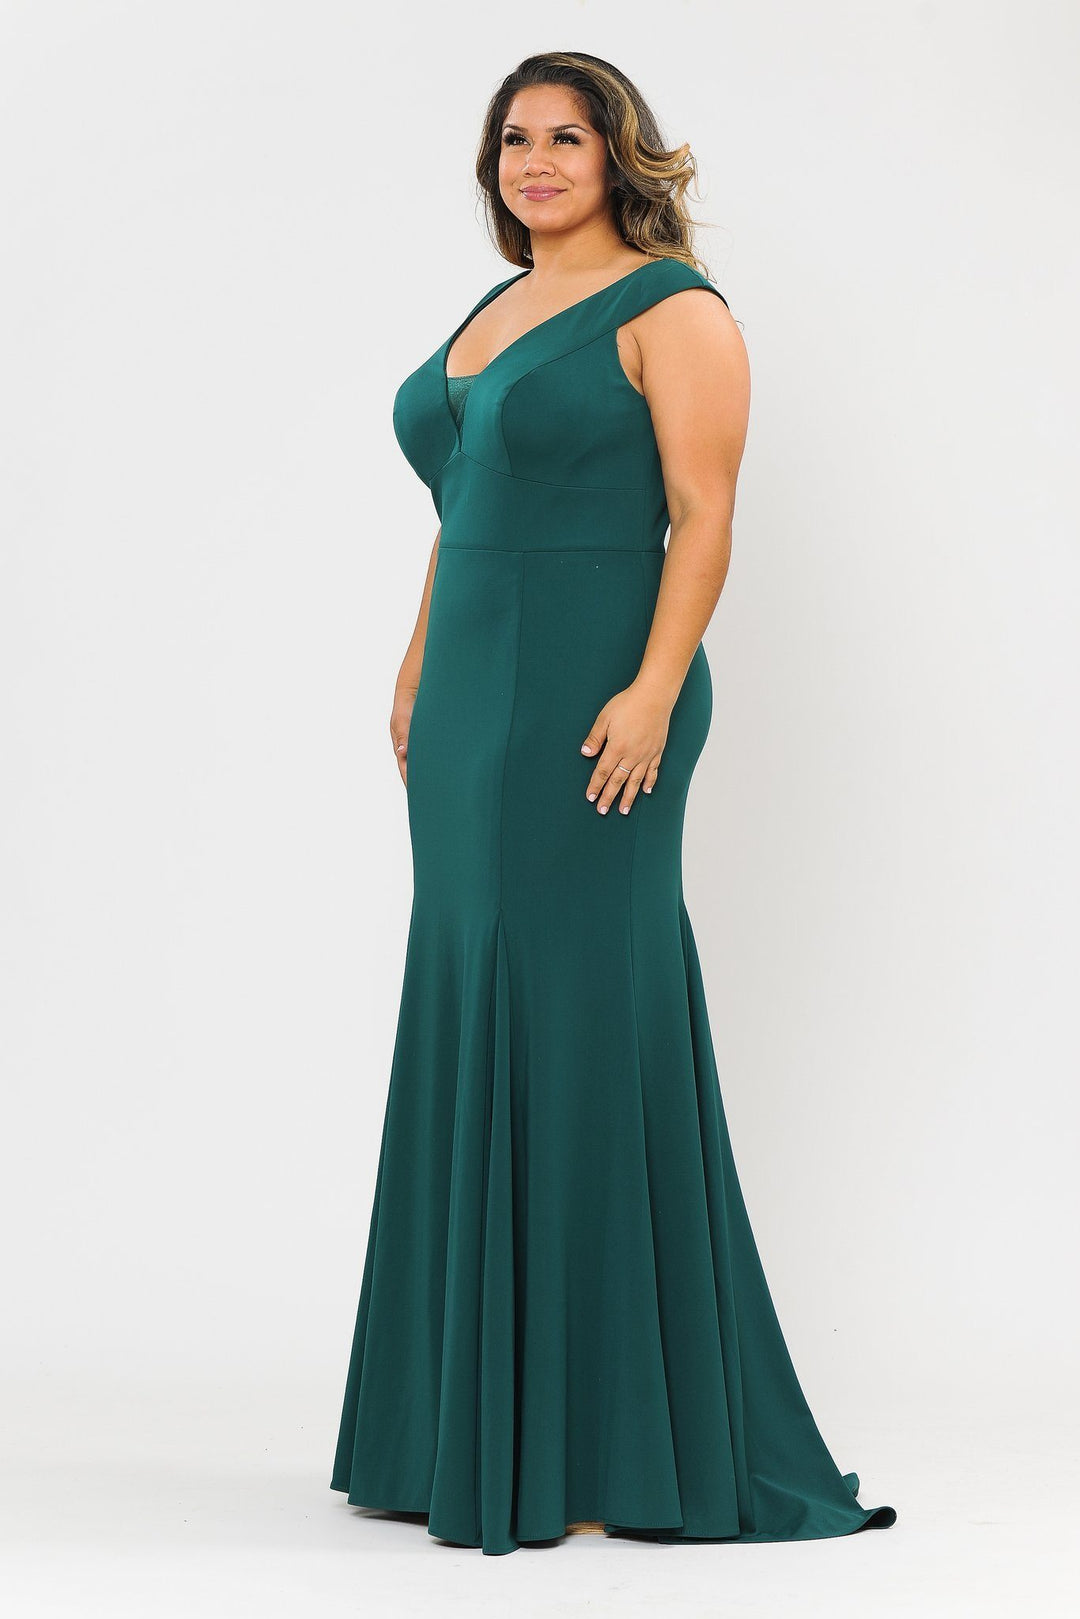 Plus Size Long V-Neck Jersey Fitted Dress by Poly USA W1022-Long Formal Dresses-ABC Fashion